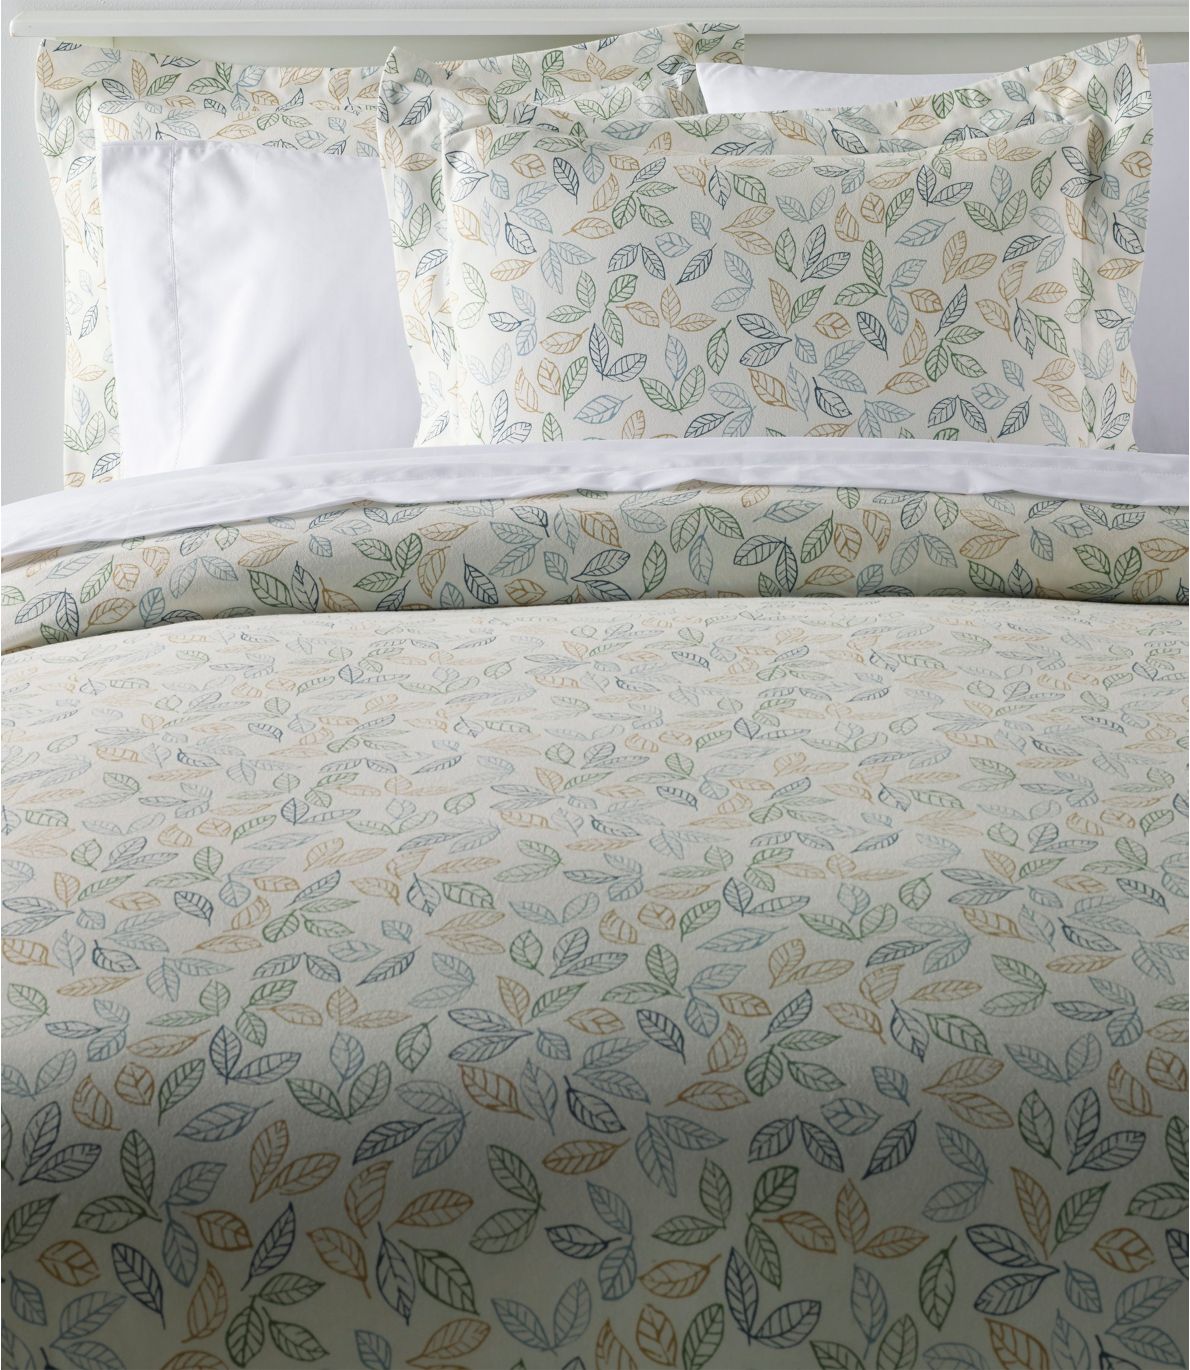 Tossed Leaves Flannel Comforter Cover Collection